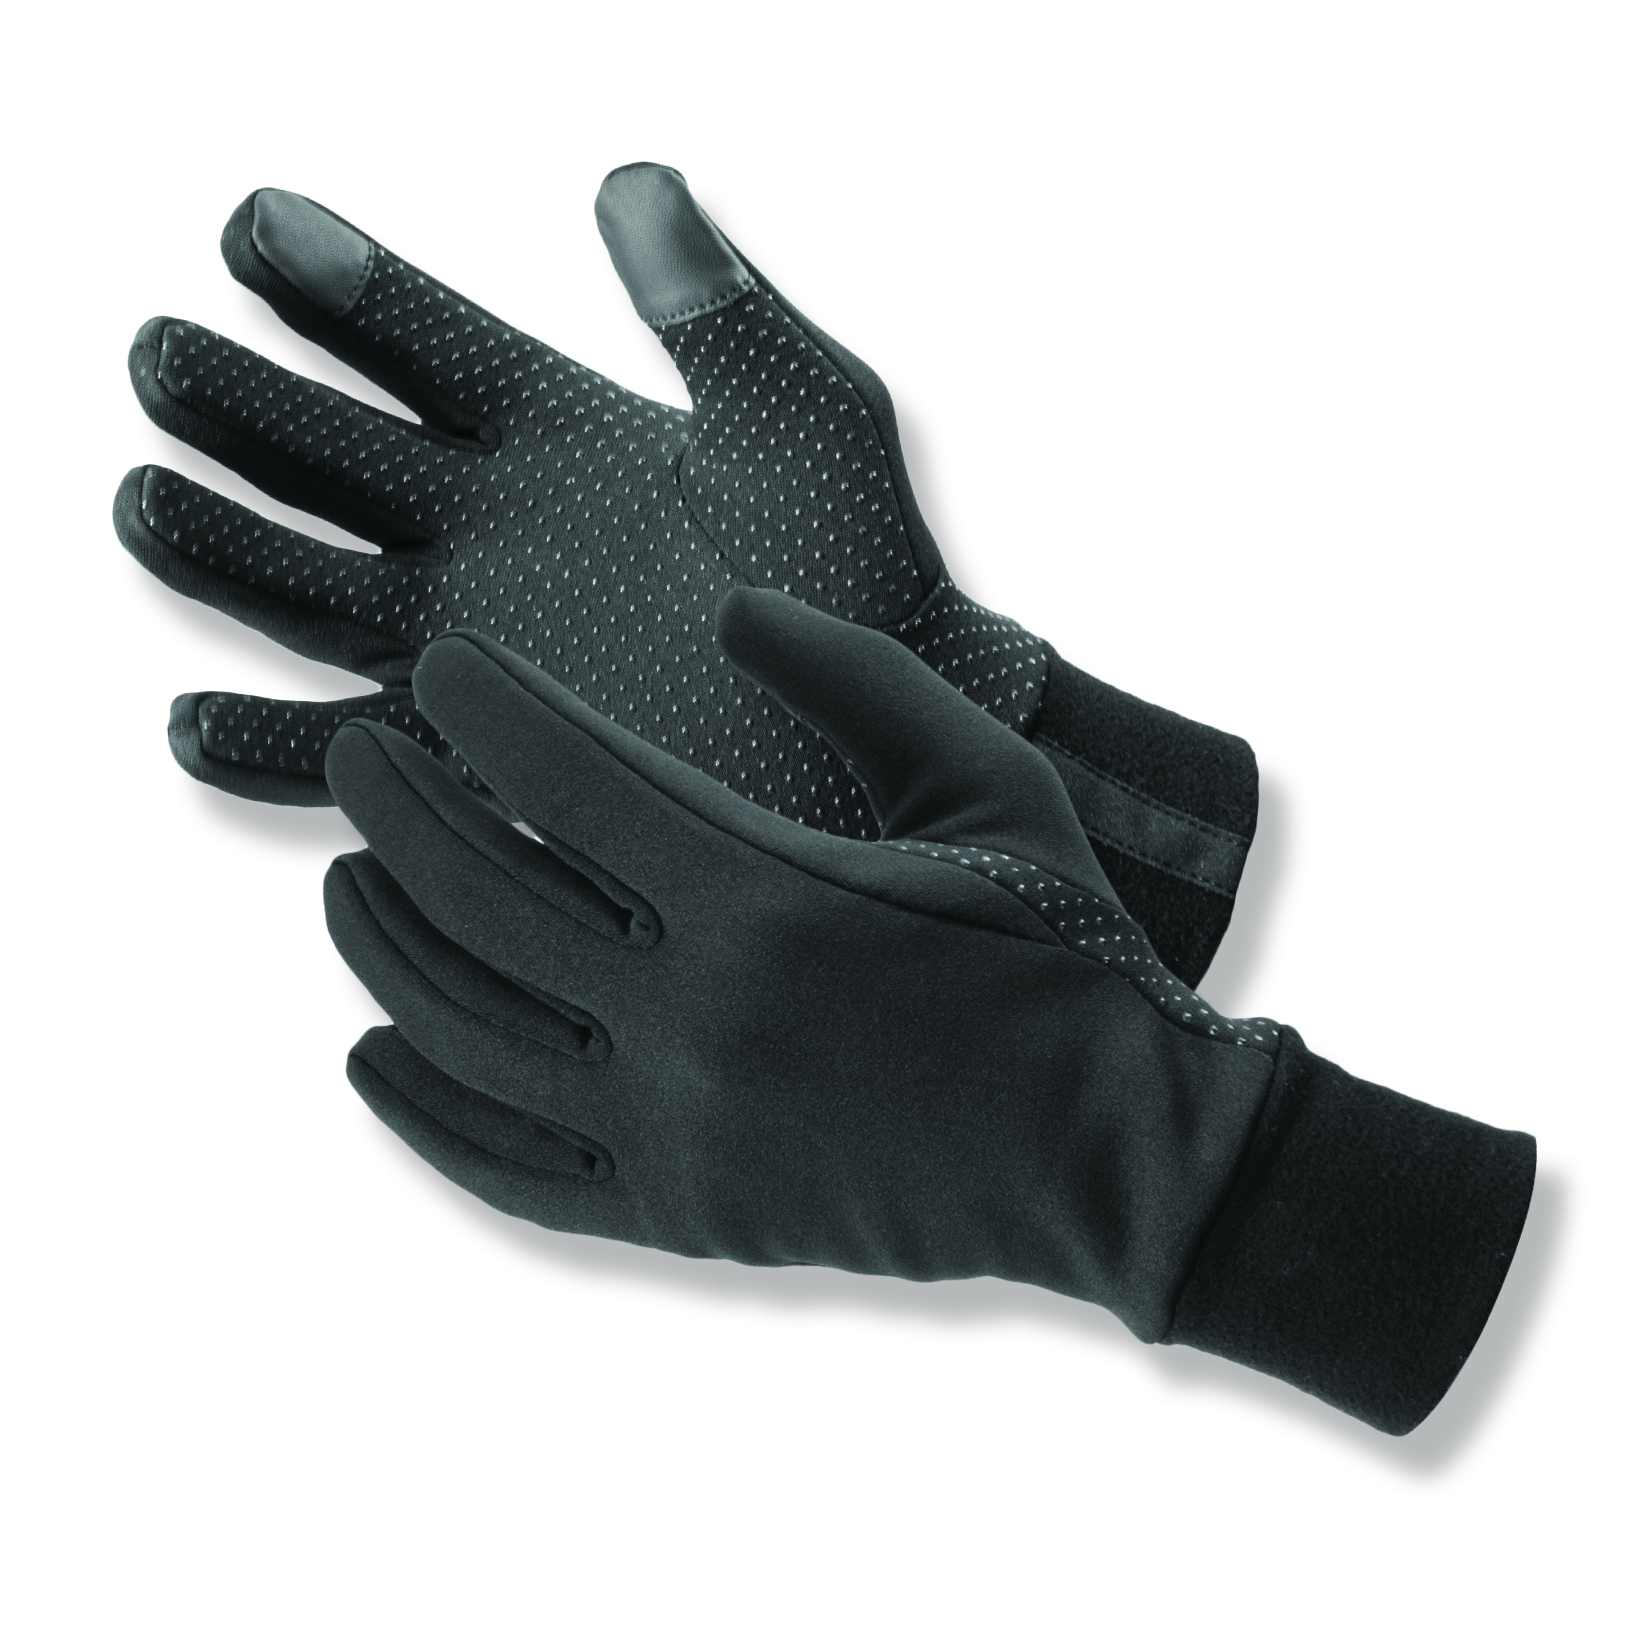 4-Way Stretch Polyester Power Tec TS™ Cold Weather Uniform Gloves are touchscreen compatible and feature gripper dots on palm.